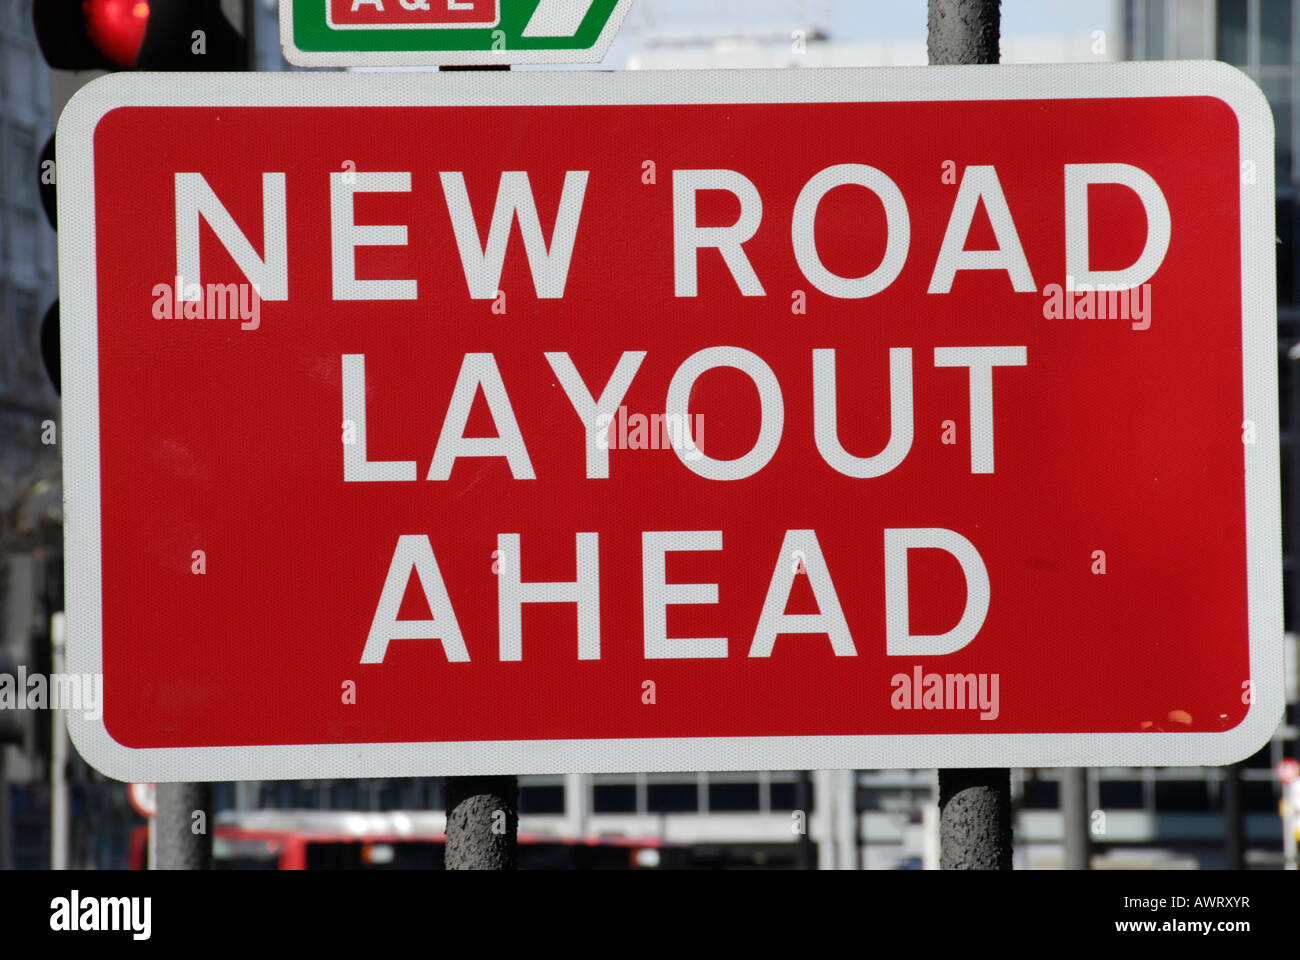 New Road Layout Ahead road sign UK Stock Photo